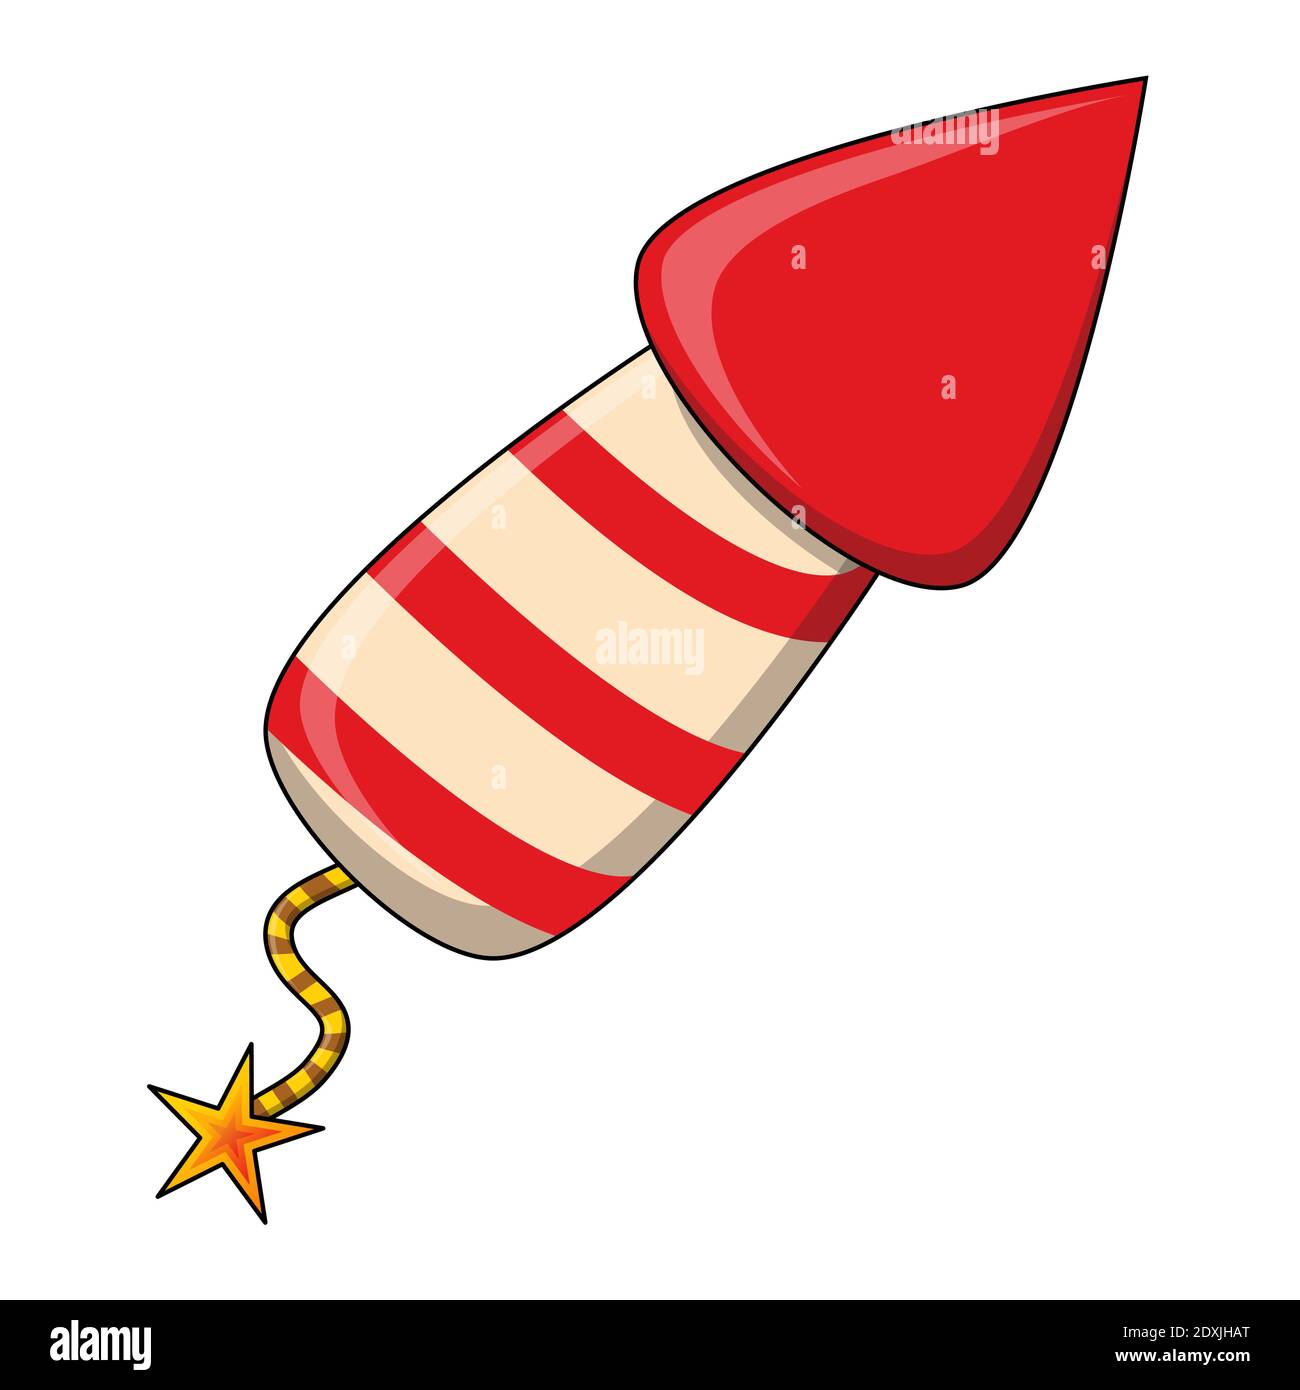 Firework rocket cartoon icon. Red stripes petard symbol for New year design. Vector illustration isolated on white background. Stock Vector